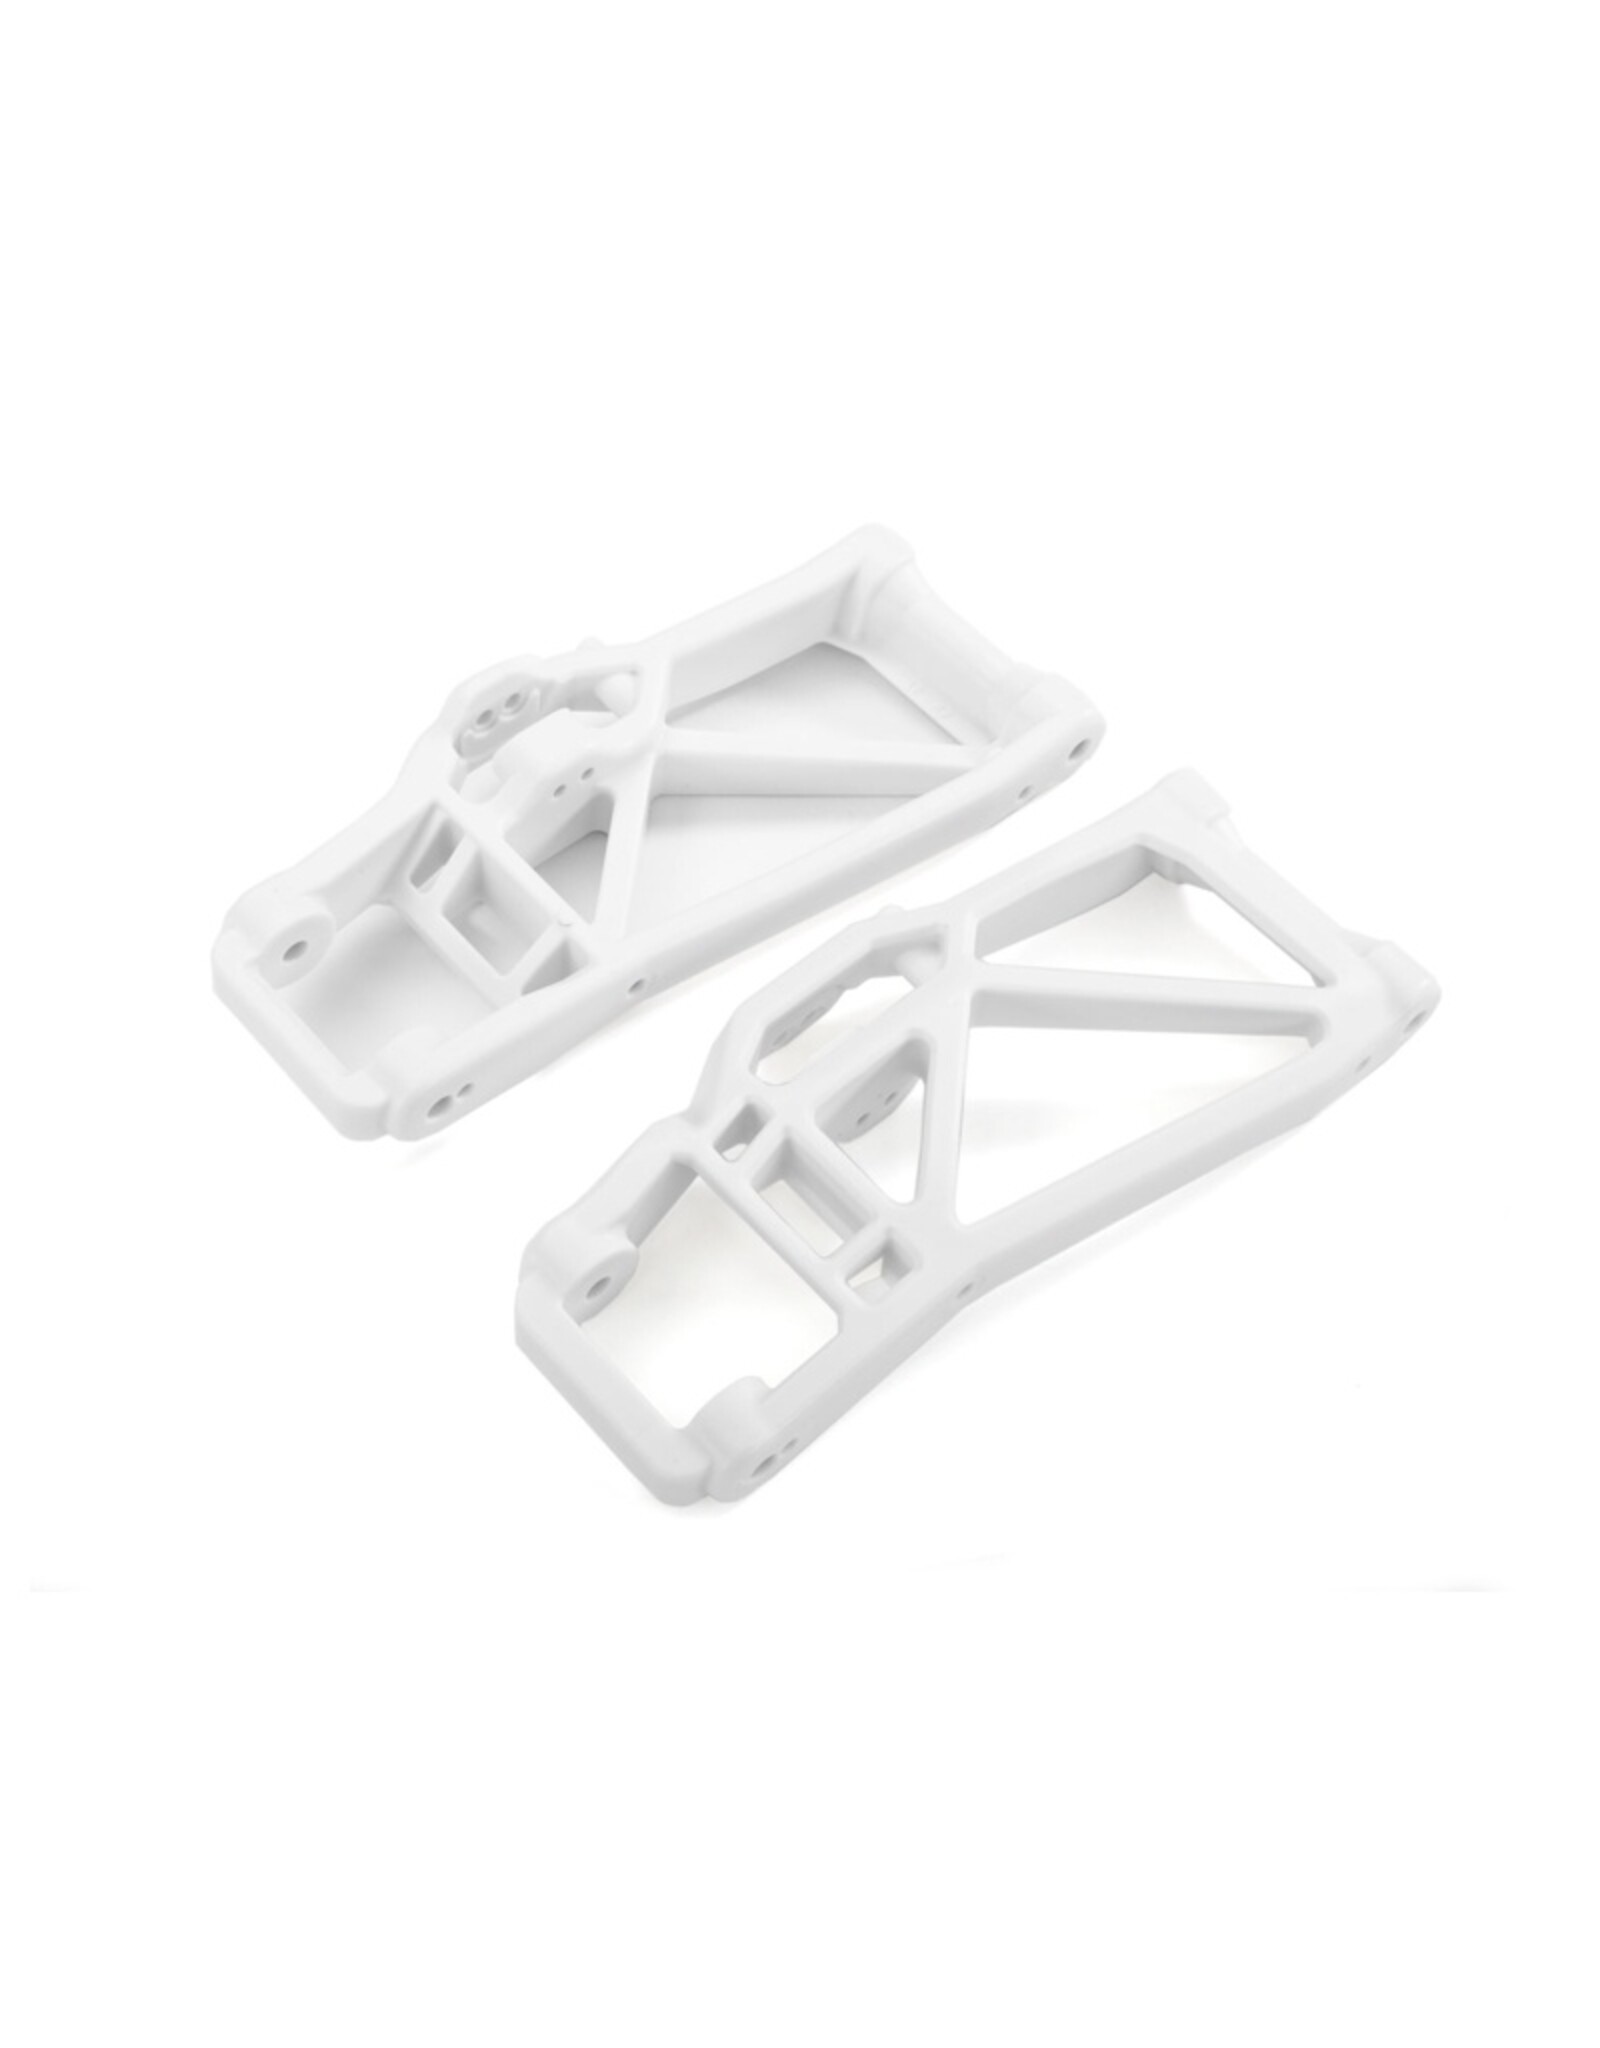 Traxxas tra8930A - Suspension arm, lower, white (left and right, front or rear) (2)